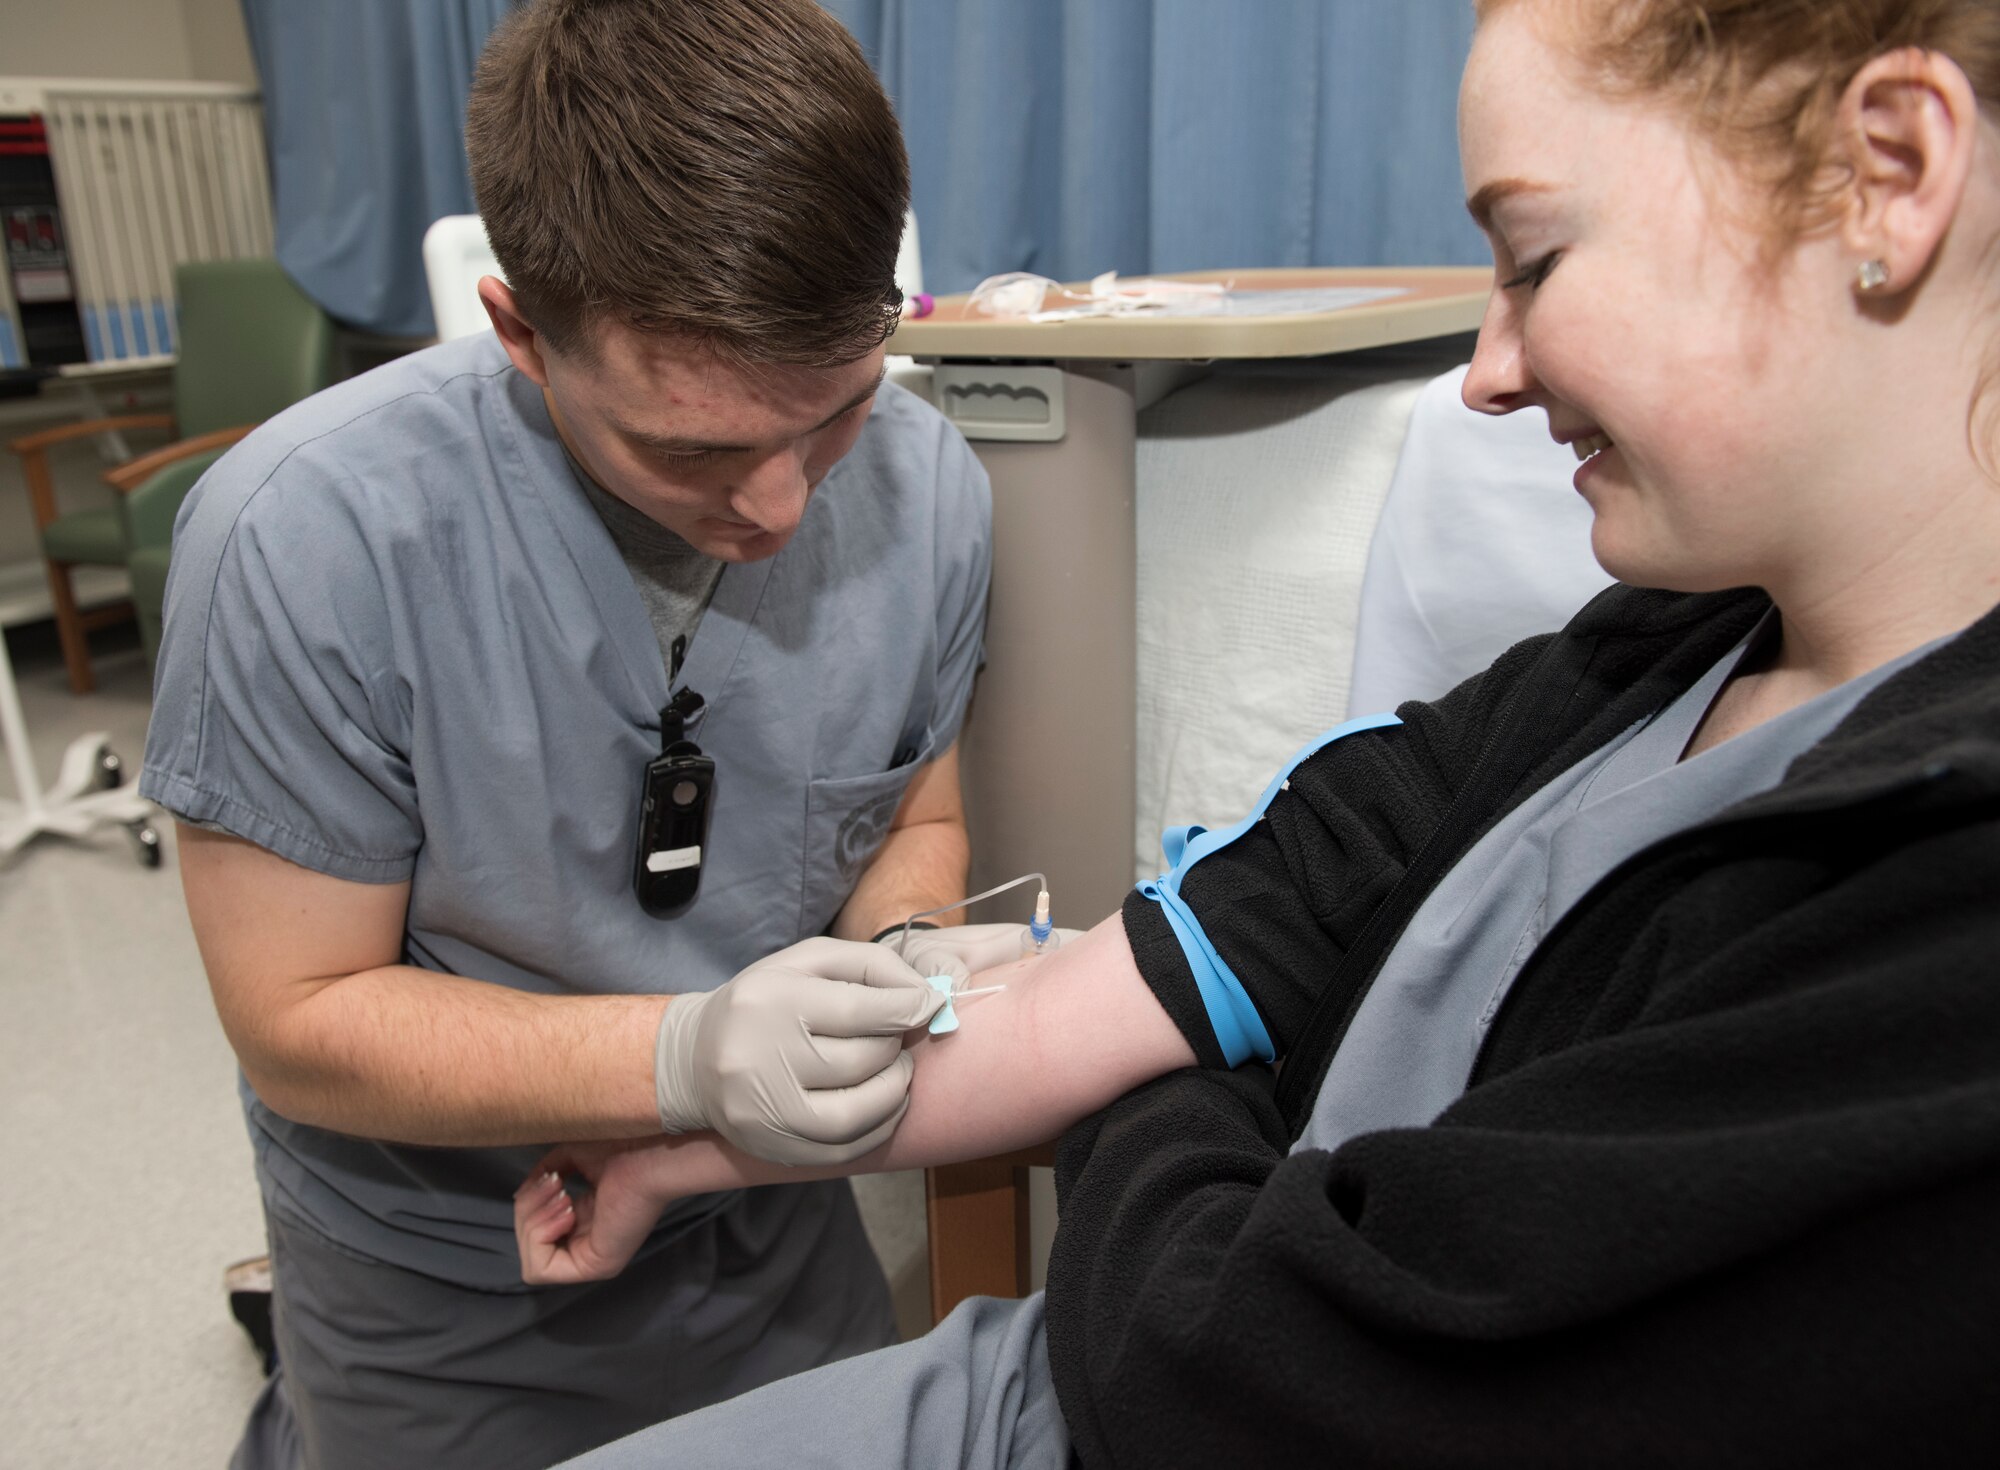 U.S. Air Force Airman 1st Class Nicolas Bertuna, left, 86th Medical Squadron aerospace medical technician demonstrates to U.S. Air Force Airman 1st Class Hayley Bell, 86th MDS medic, how to draw blood at Landstuhl Regional Medical Center, Dec. 13, 2019. The 86th Airlift Wing named Bertuna Airlifter of the Week for his accomplishments, including being the only Airman at LRMC to lead U.S. Army physical training three times a week.